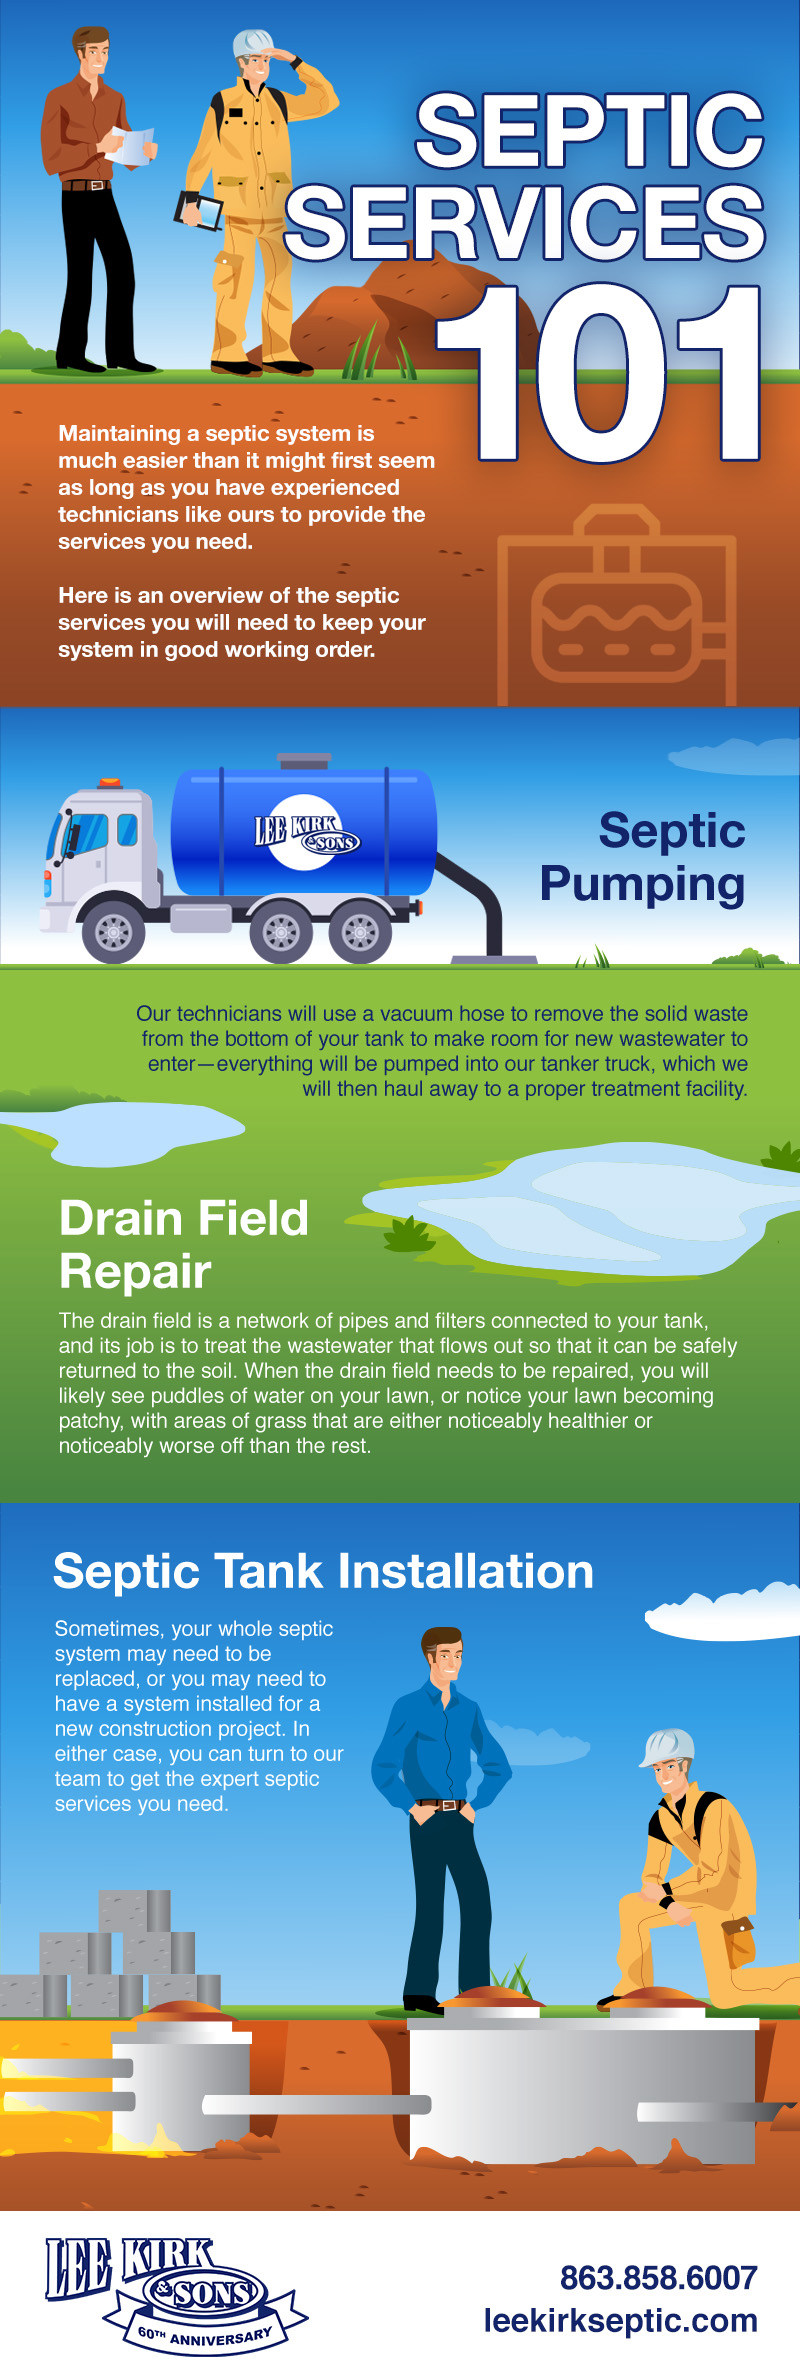 Septic Services 101 [infographic]